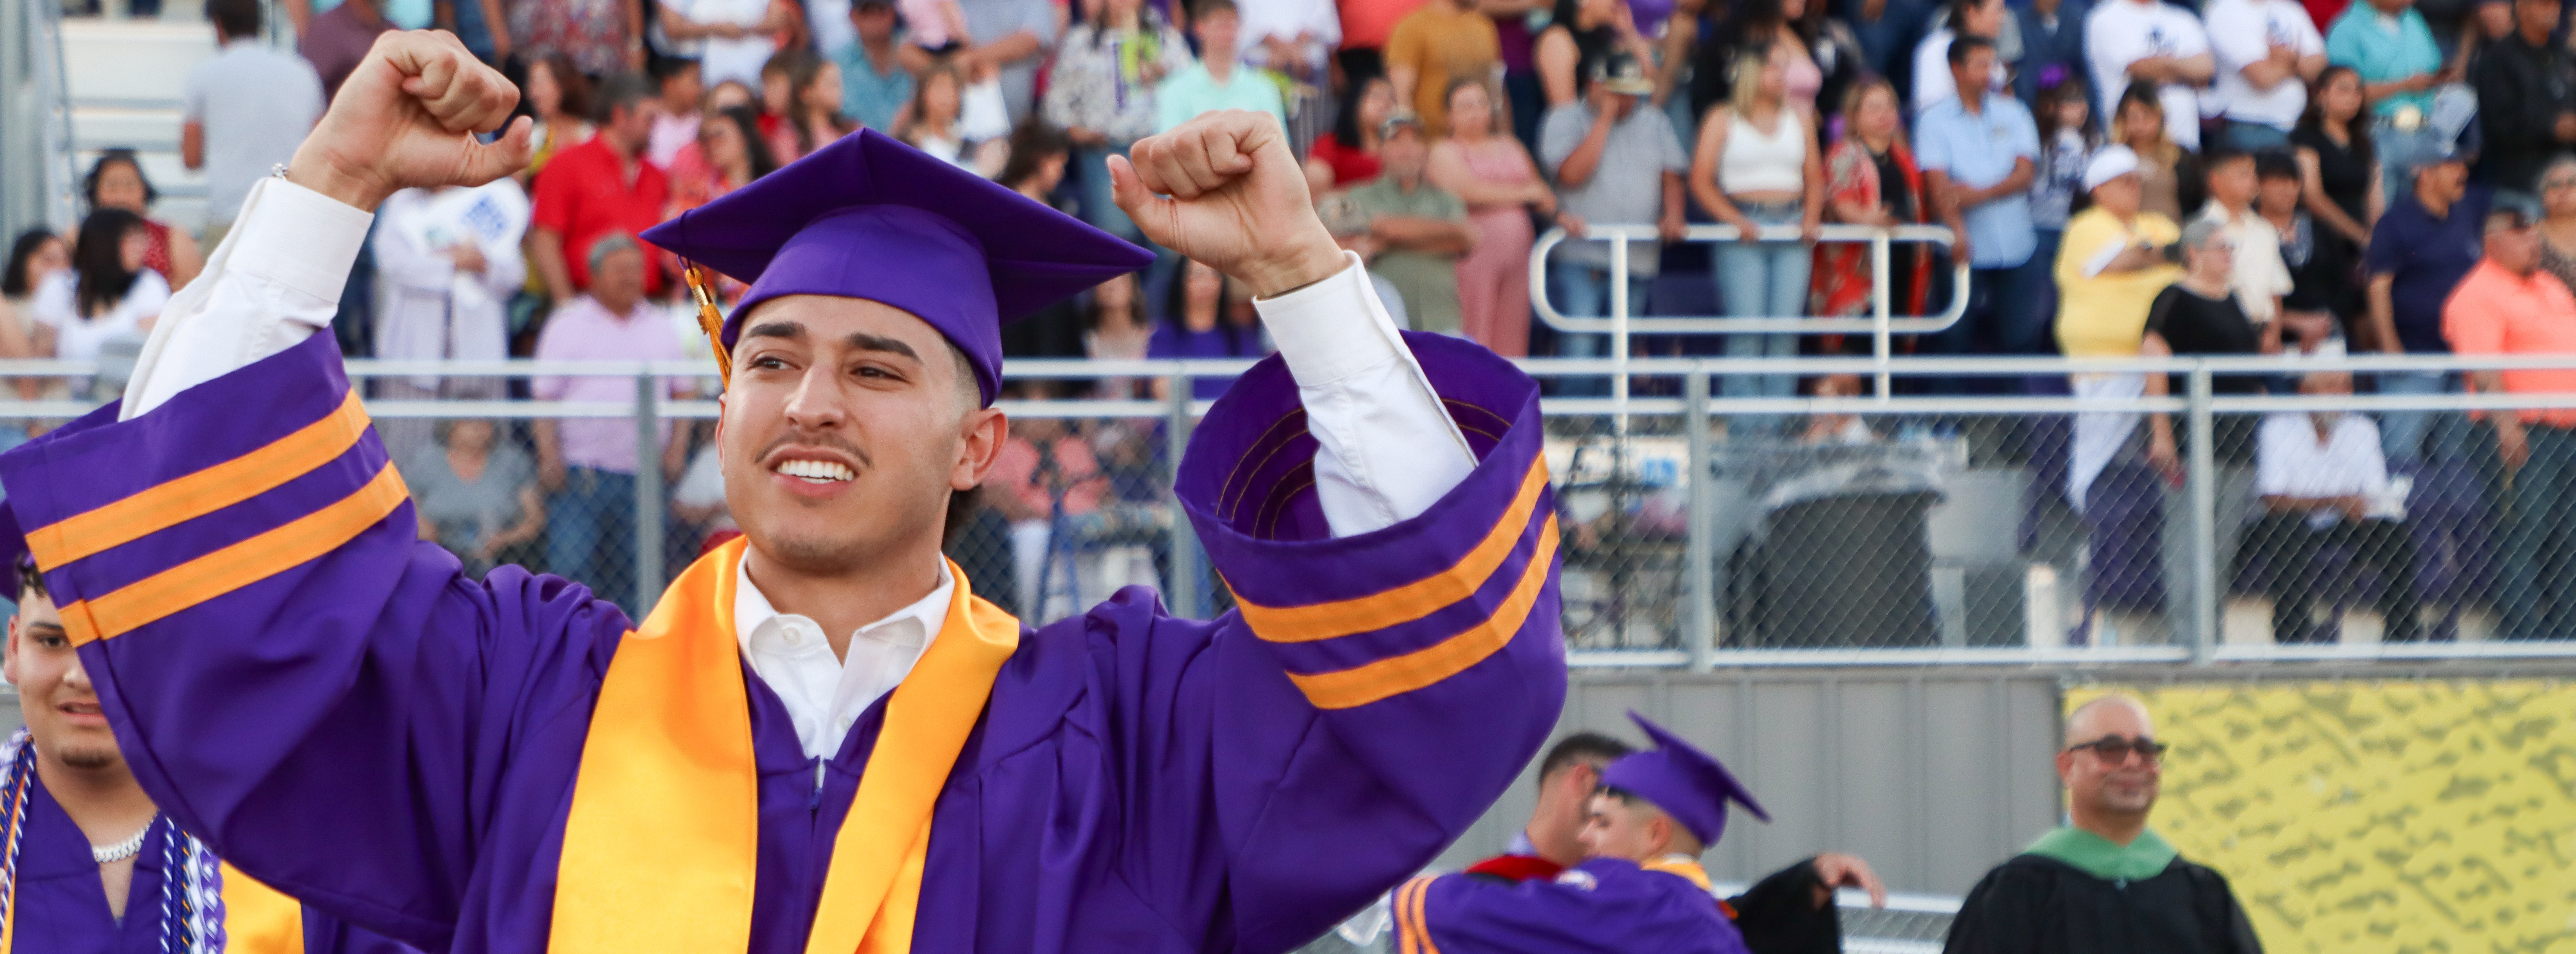 student holding arms in victory walking into graduation ceremony